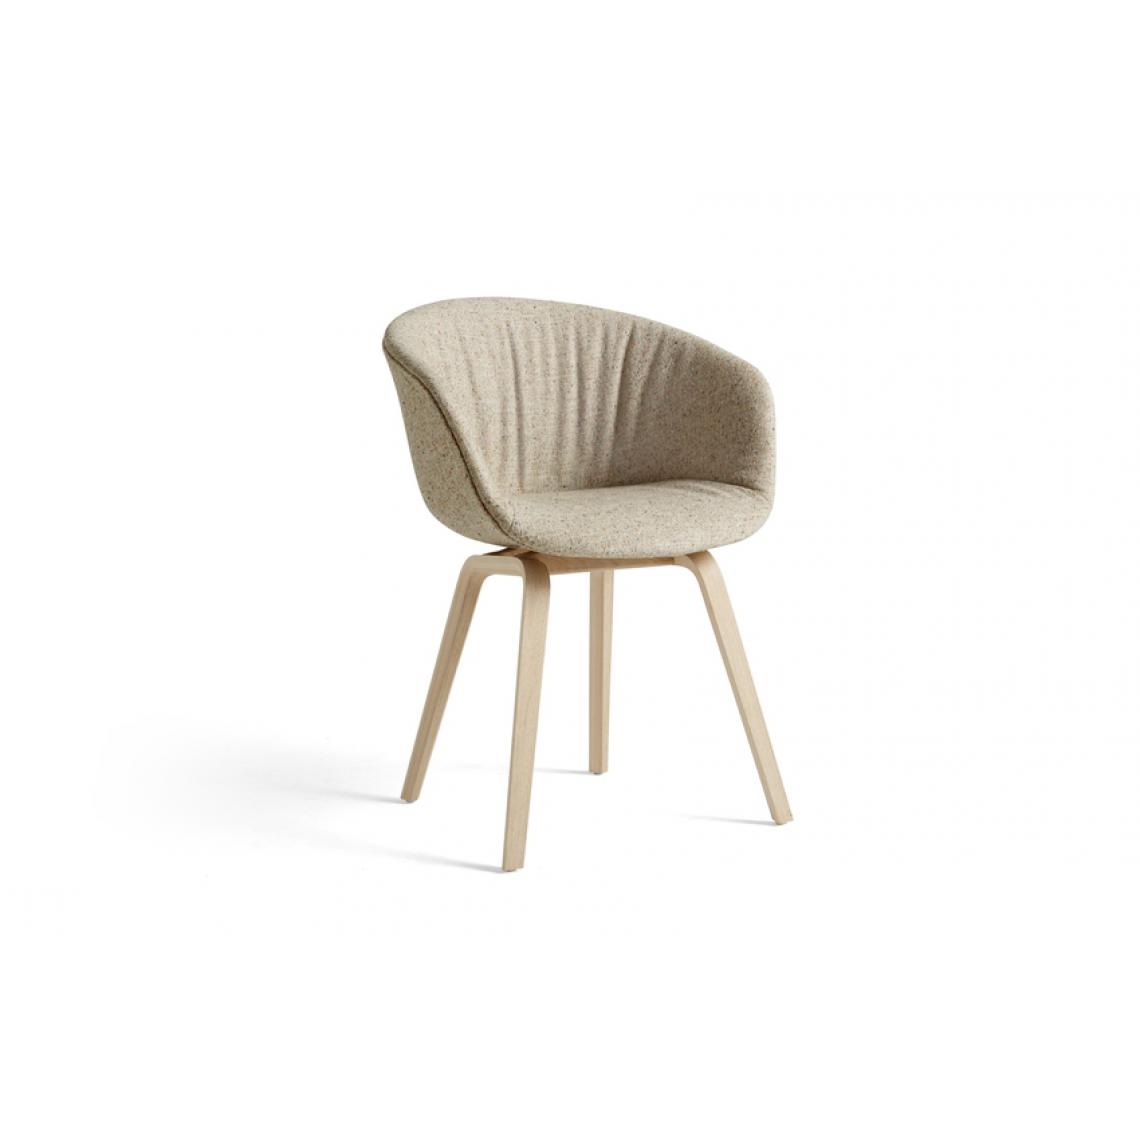 Hay - About A Chair 23 Soft - Bolgheri LGG 60 - Chaises